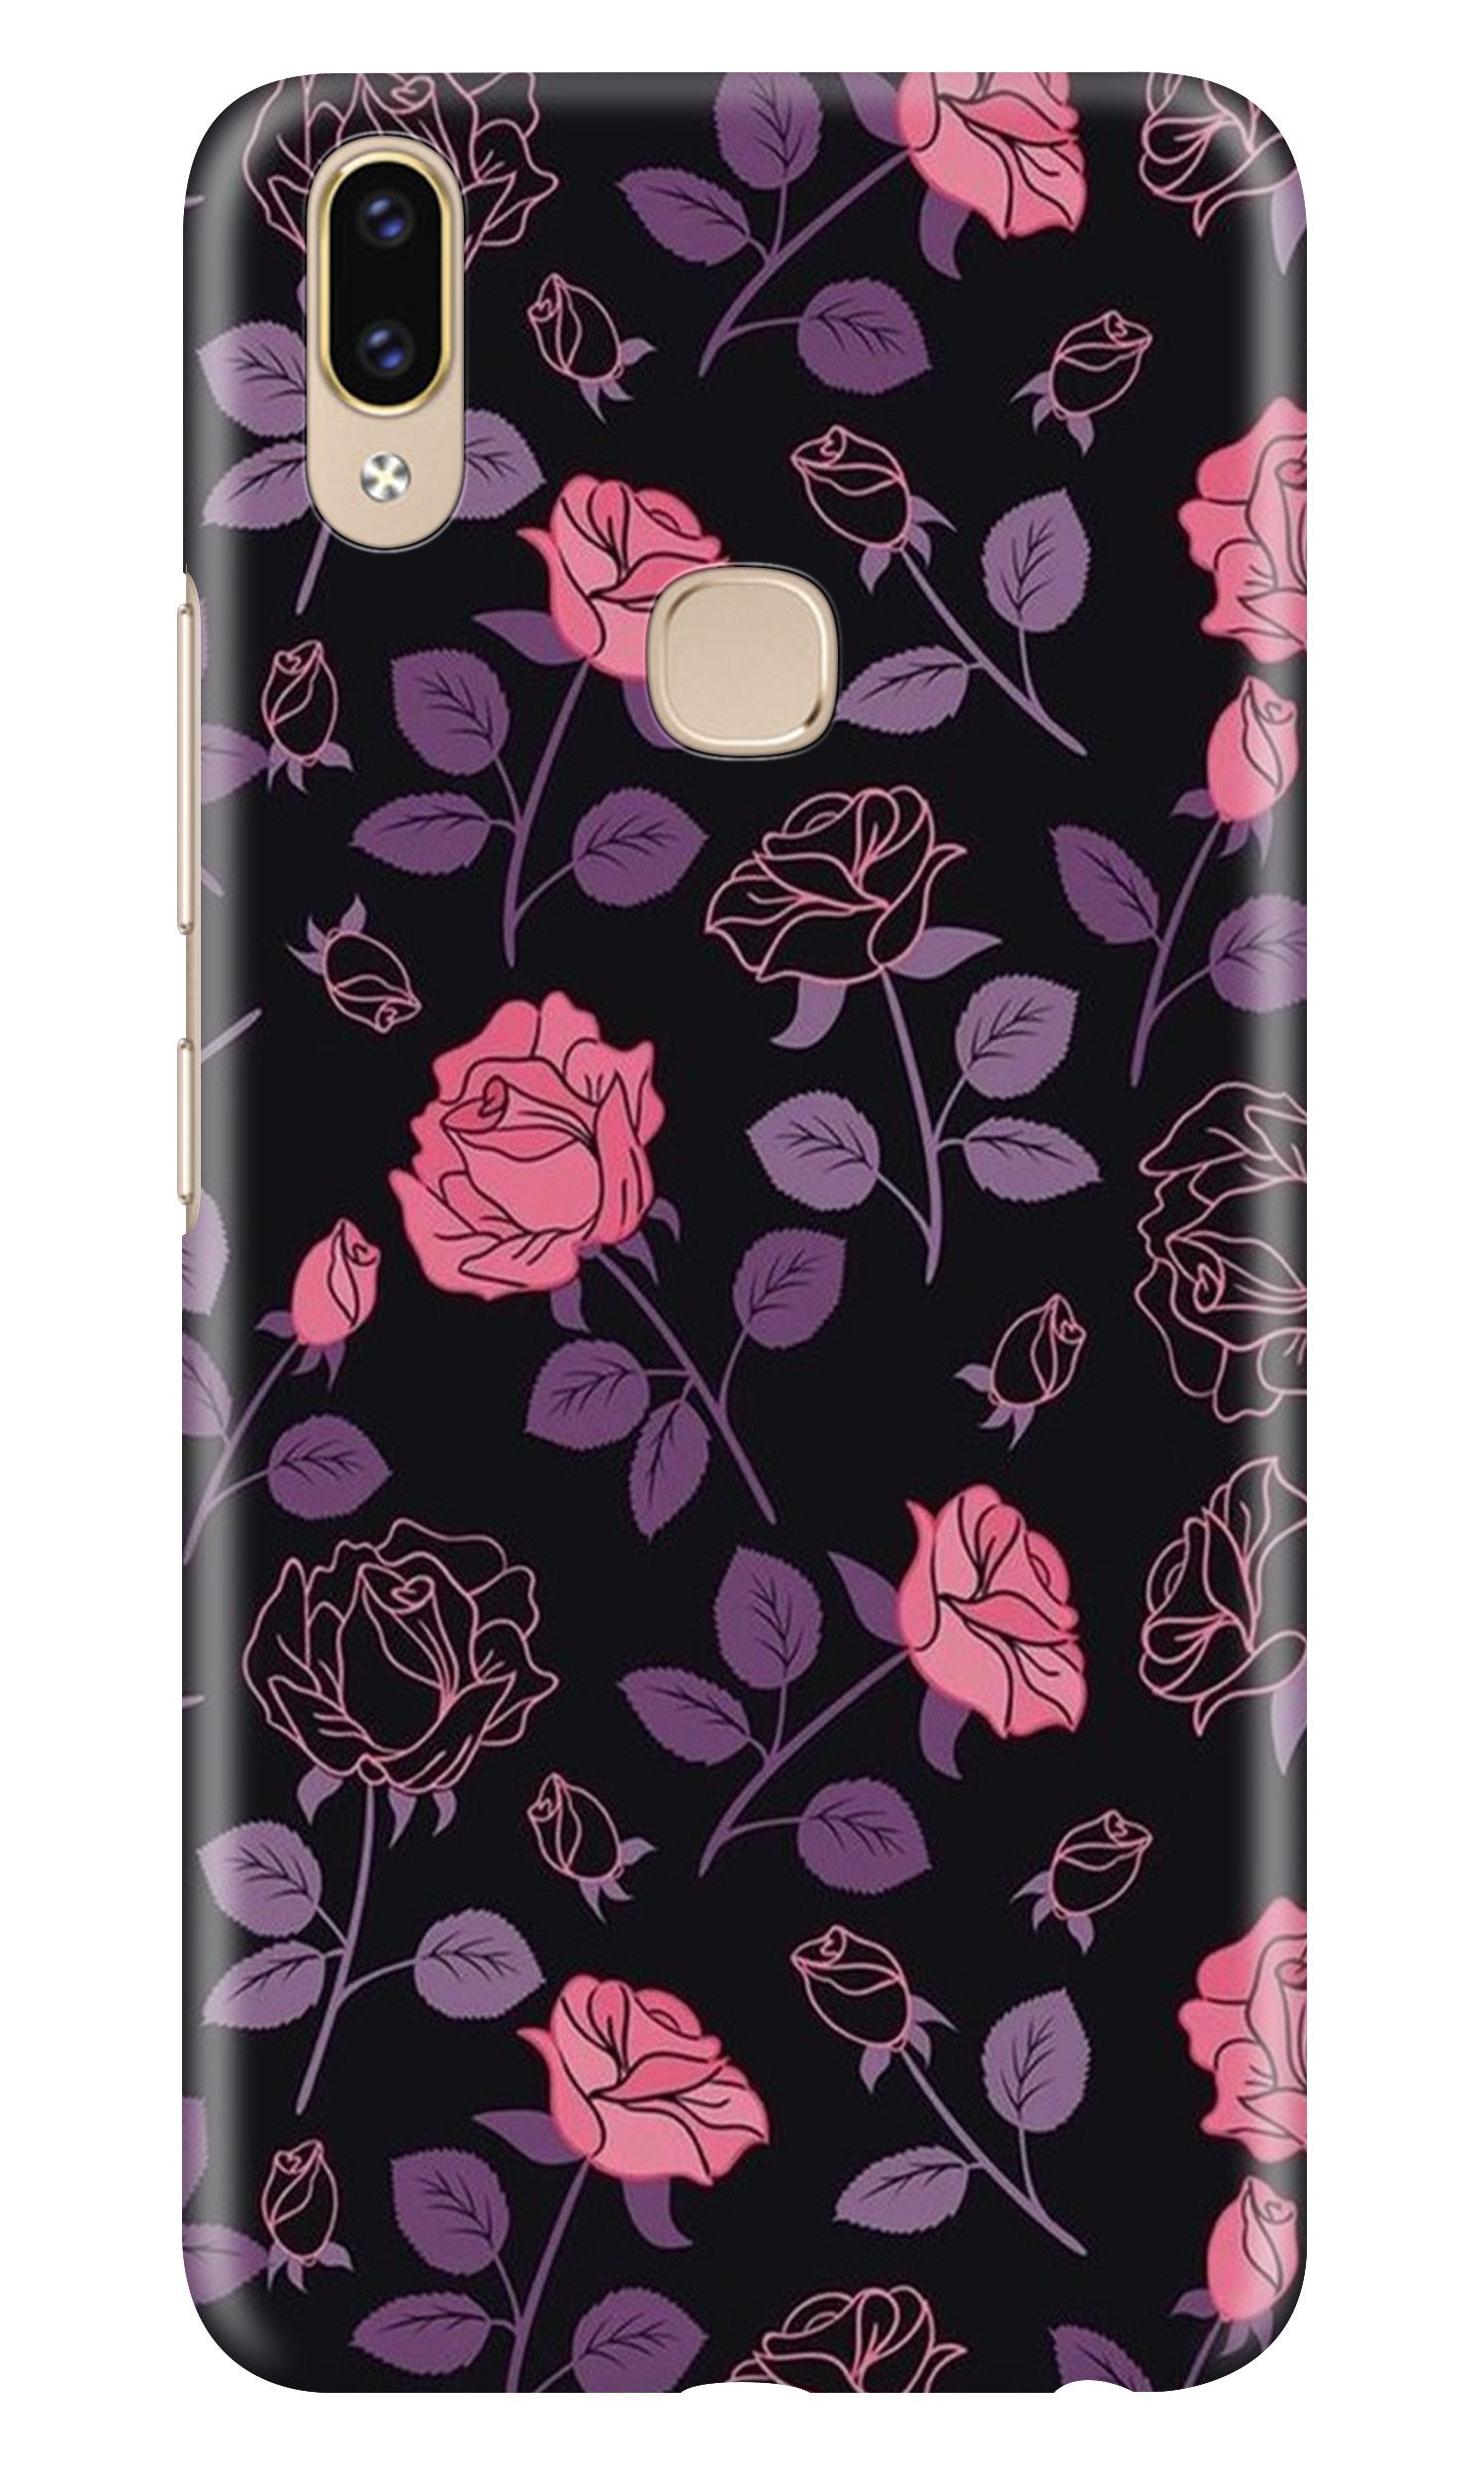 Rose Pattern Case for Asus Zenfone Max M2